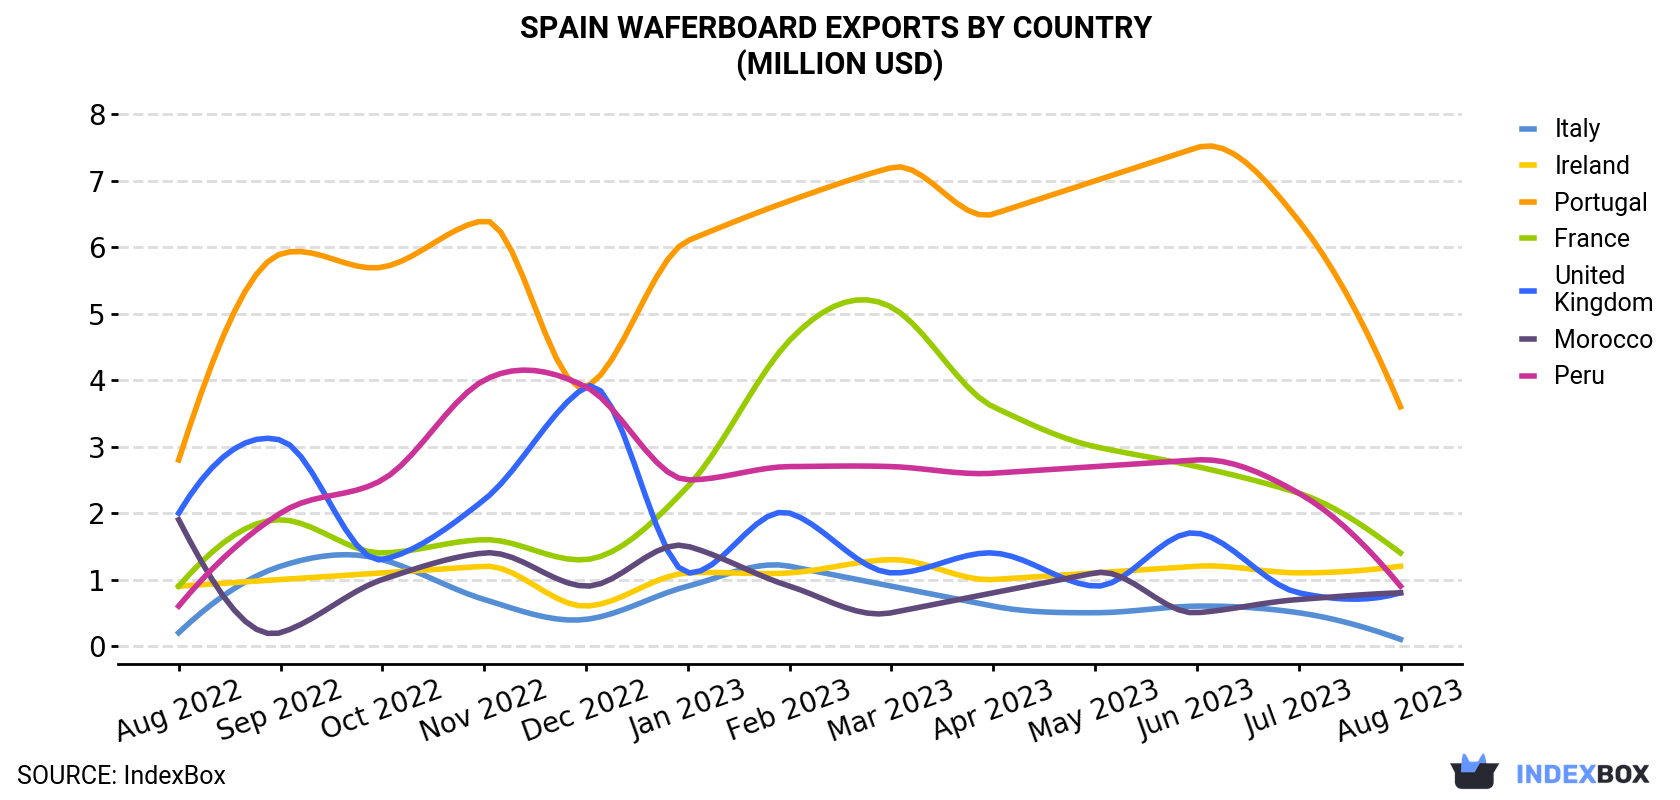 Spain Waferboard Exports By Country (Million USD)